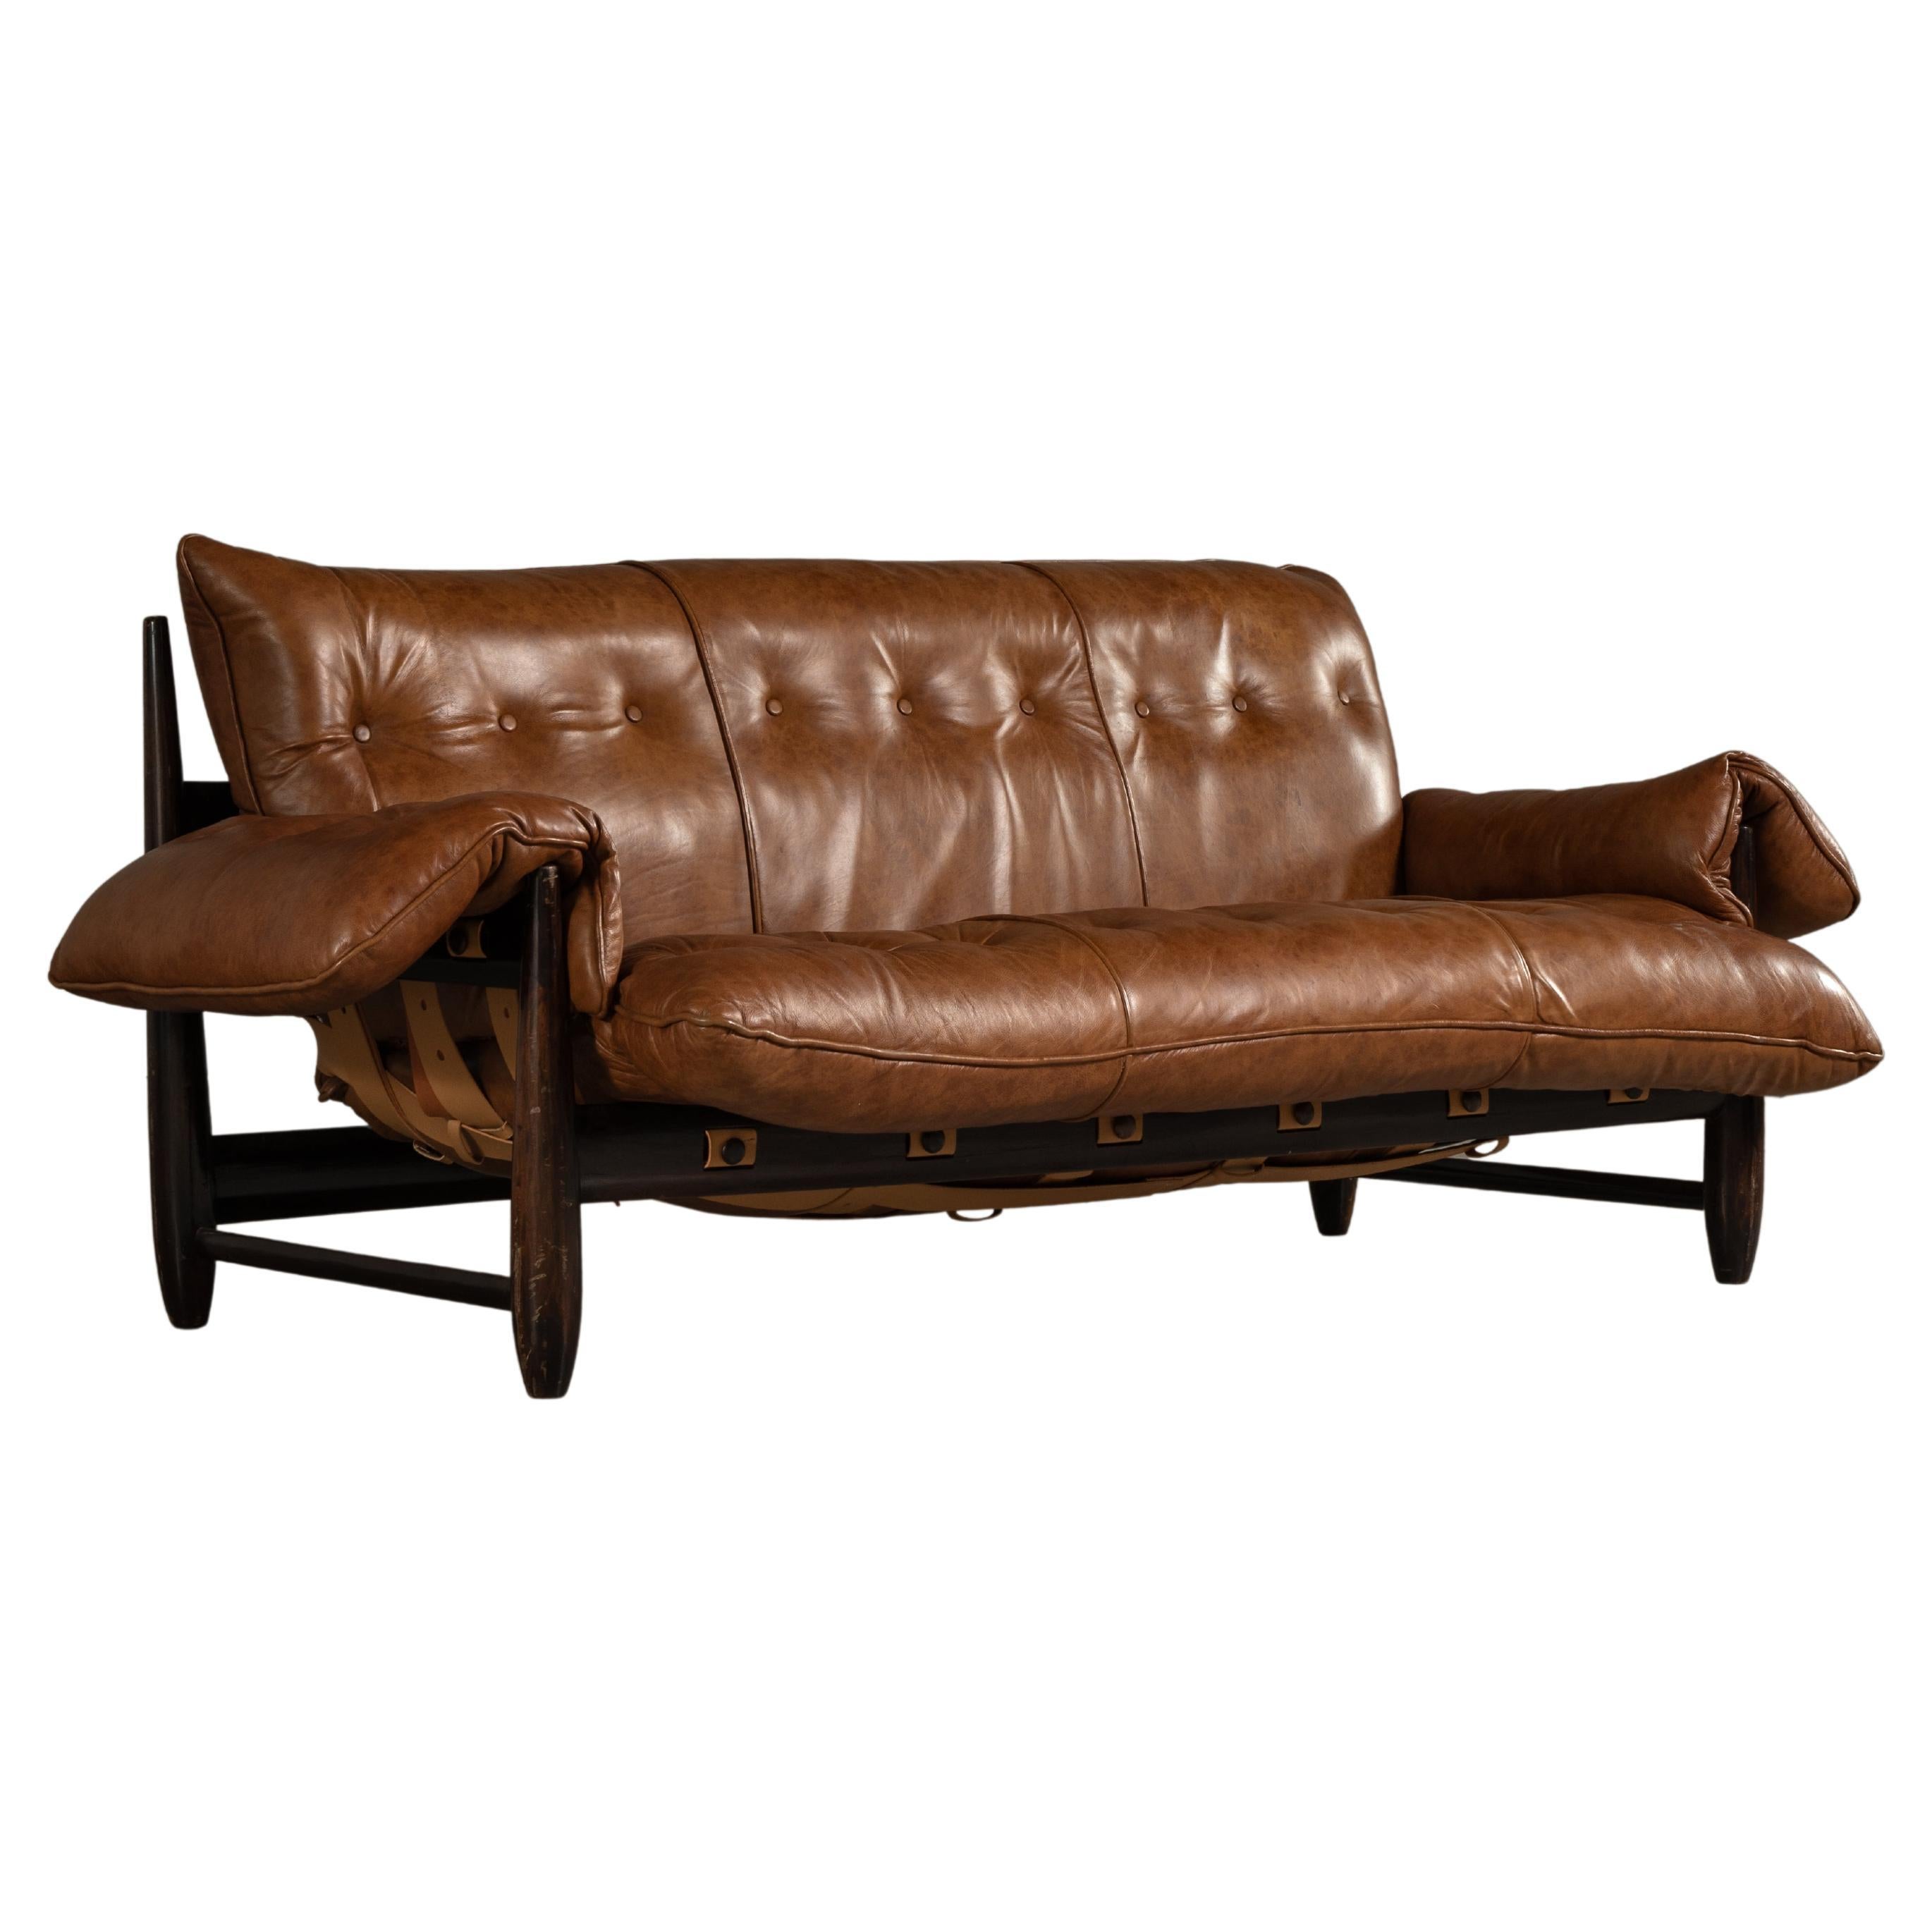 'Mole' Sofa in Leather, By Sergio Rodrigues, Brazilian Mid-Century Modern